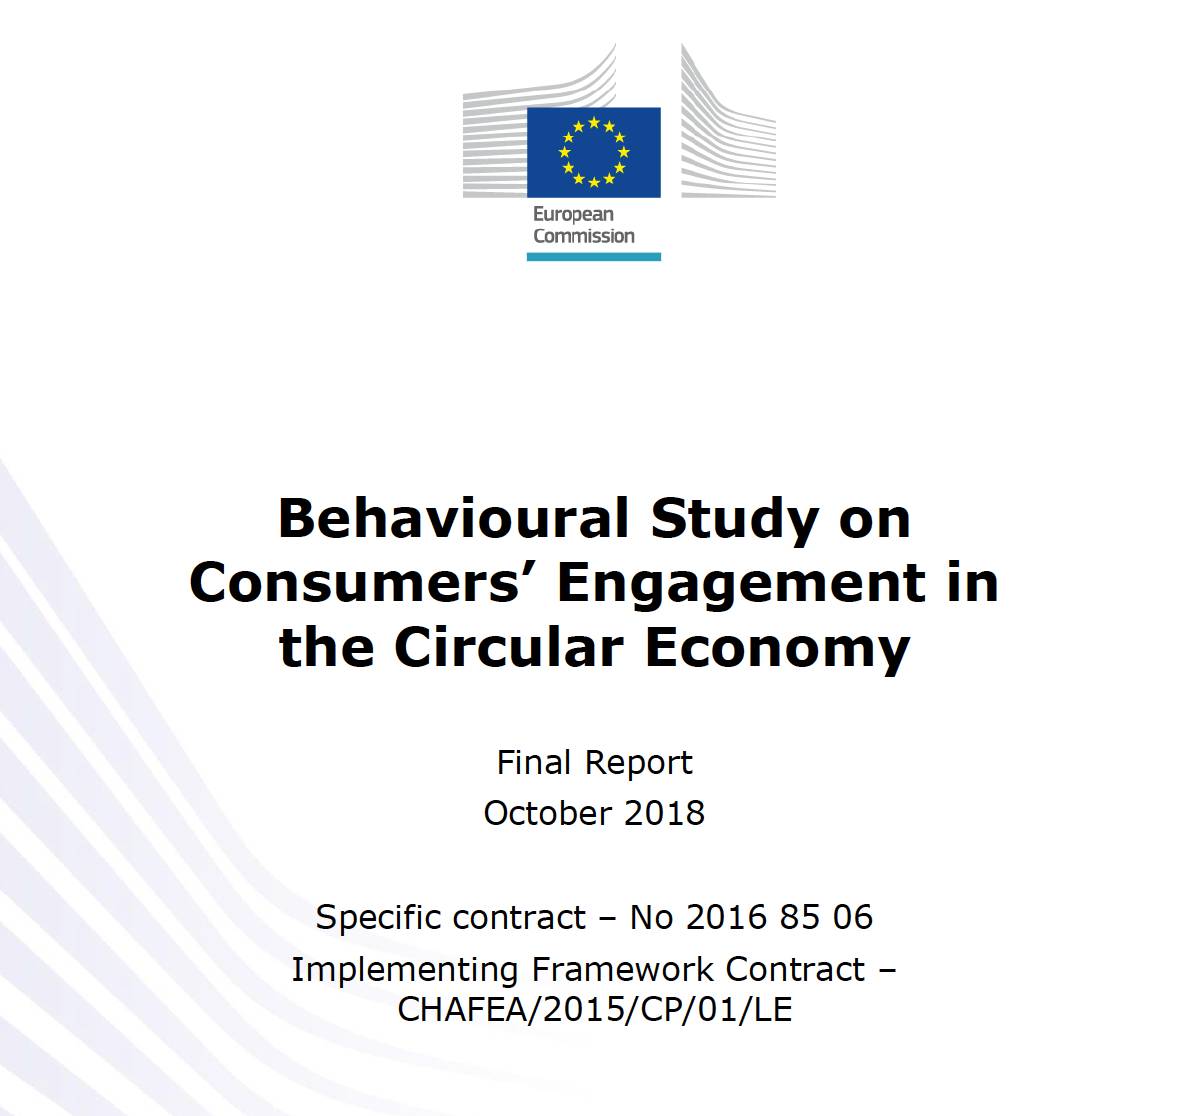 Behavioural Study on Consumer's Engagement in the Circular Economy